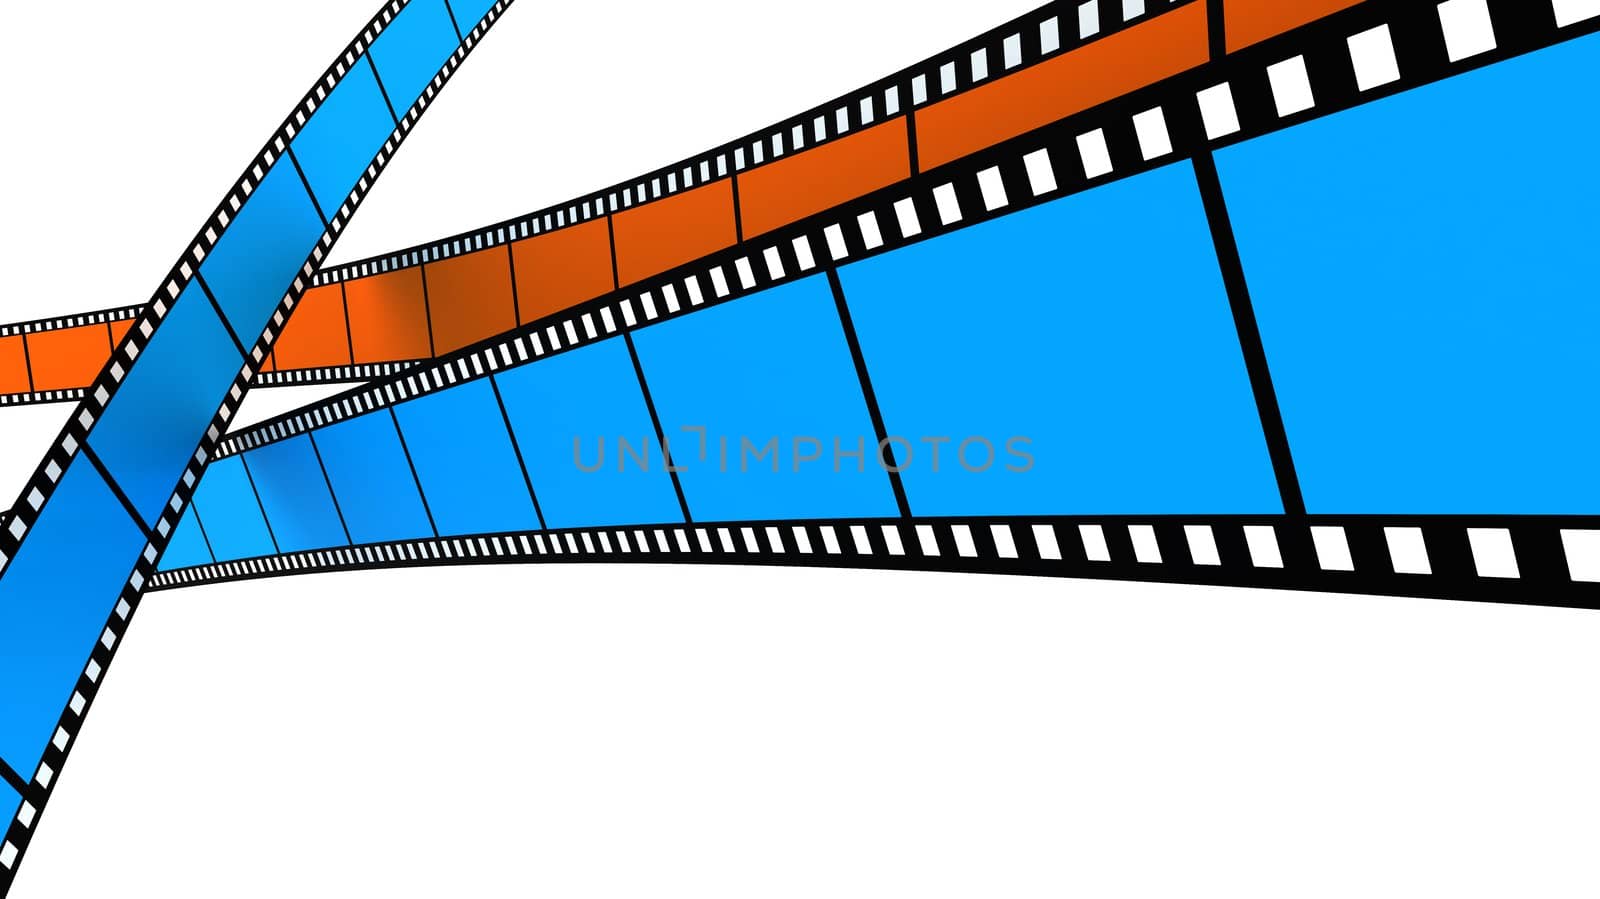 Colored film on white background. Blue and orange